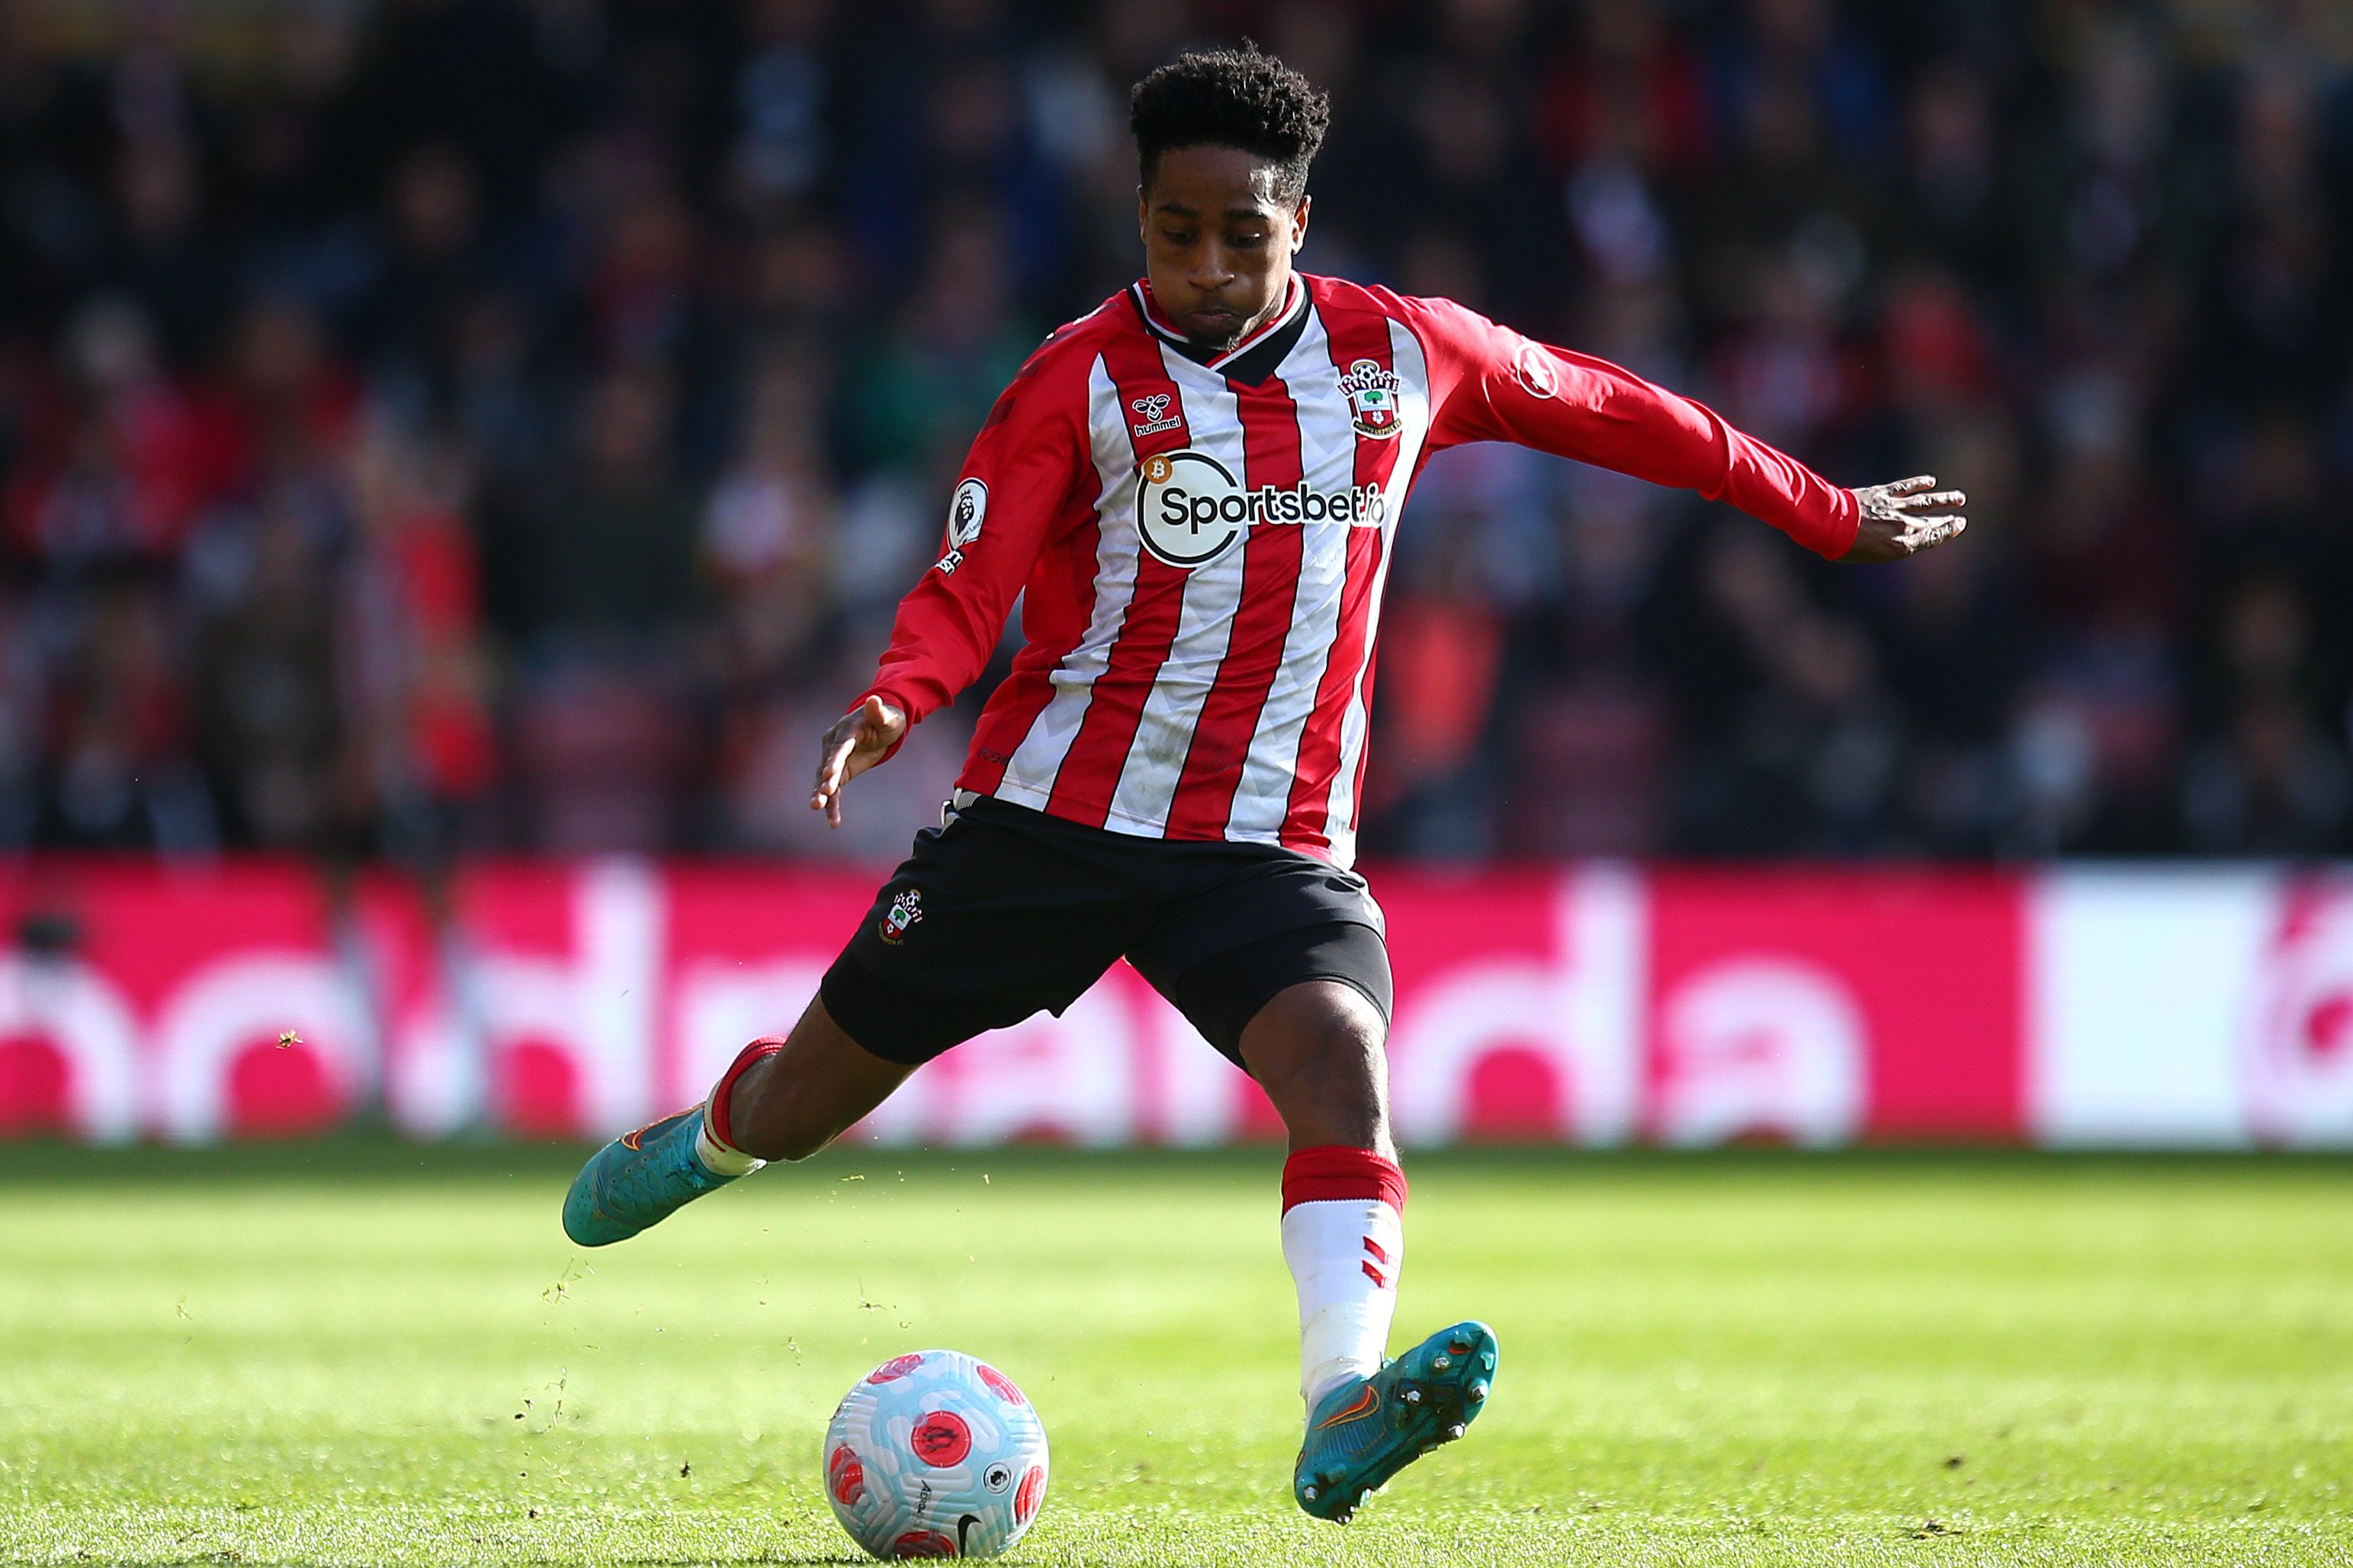 Kyle Walker-Peters of Southampton during the Premier League match between Southampton and Watford at St Mary's Stadium on March 13, 2022 in Southampton, England